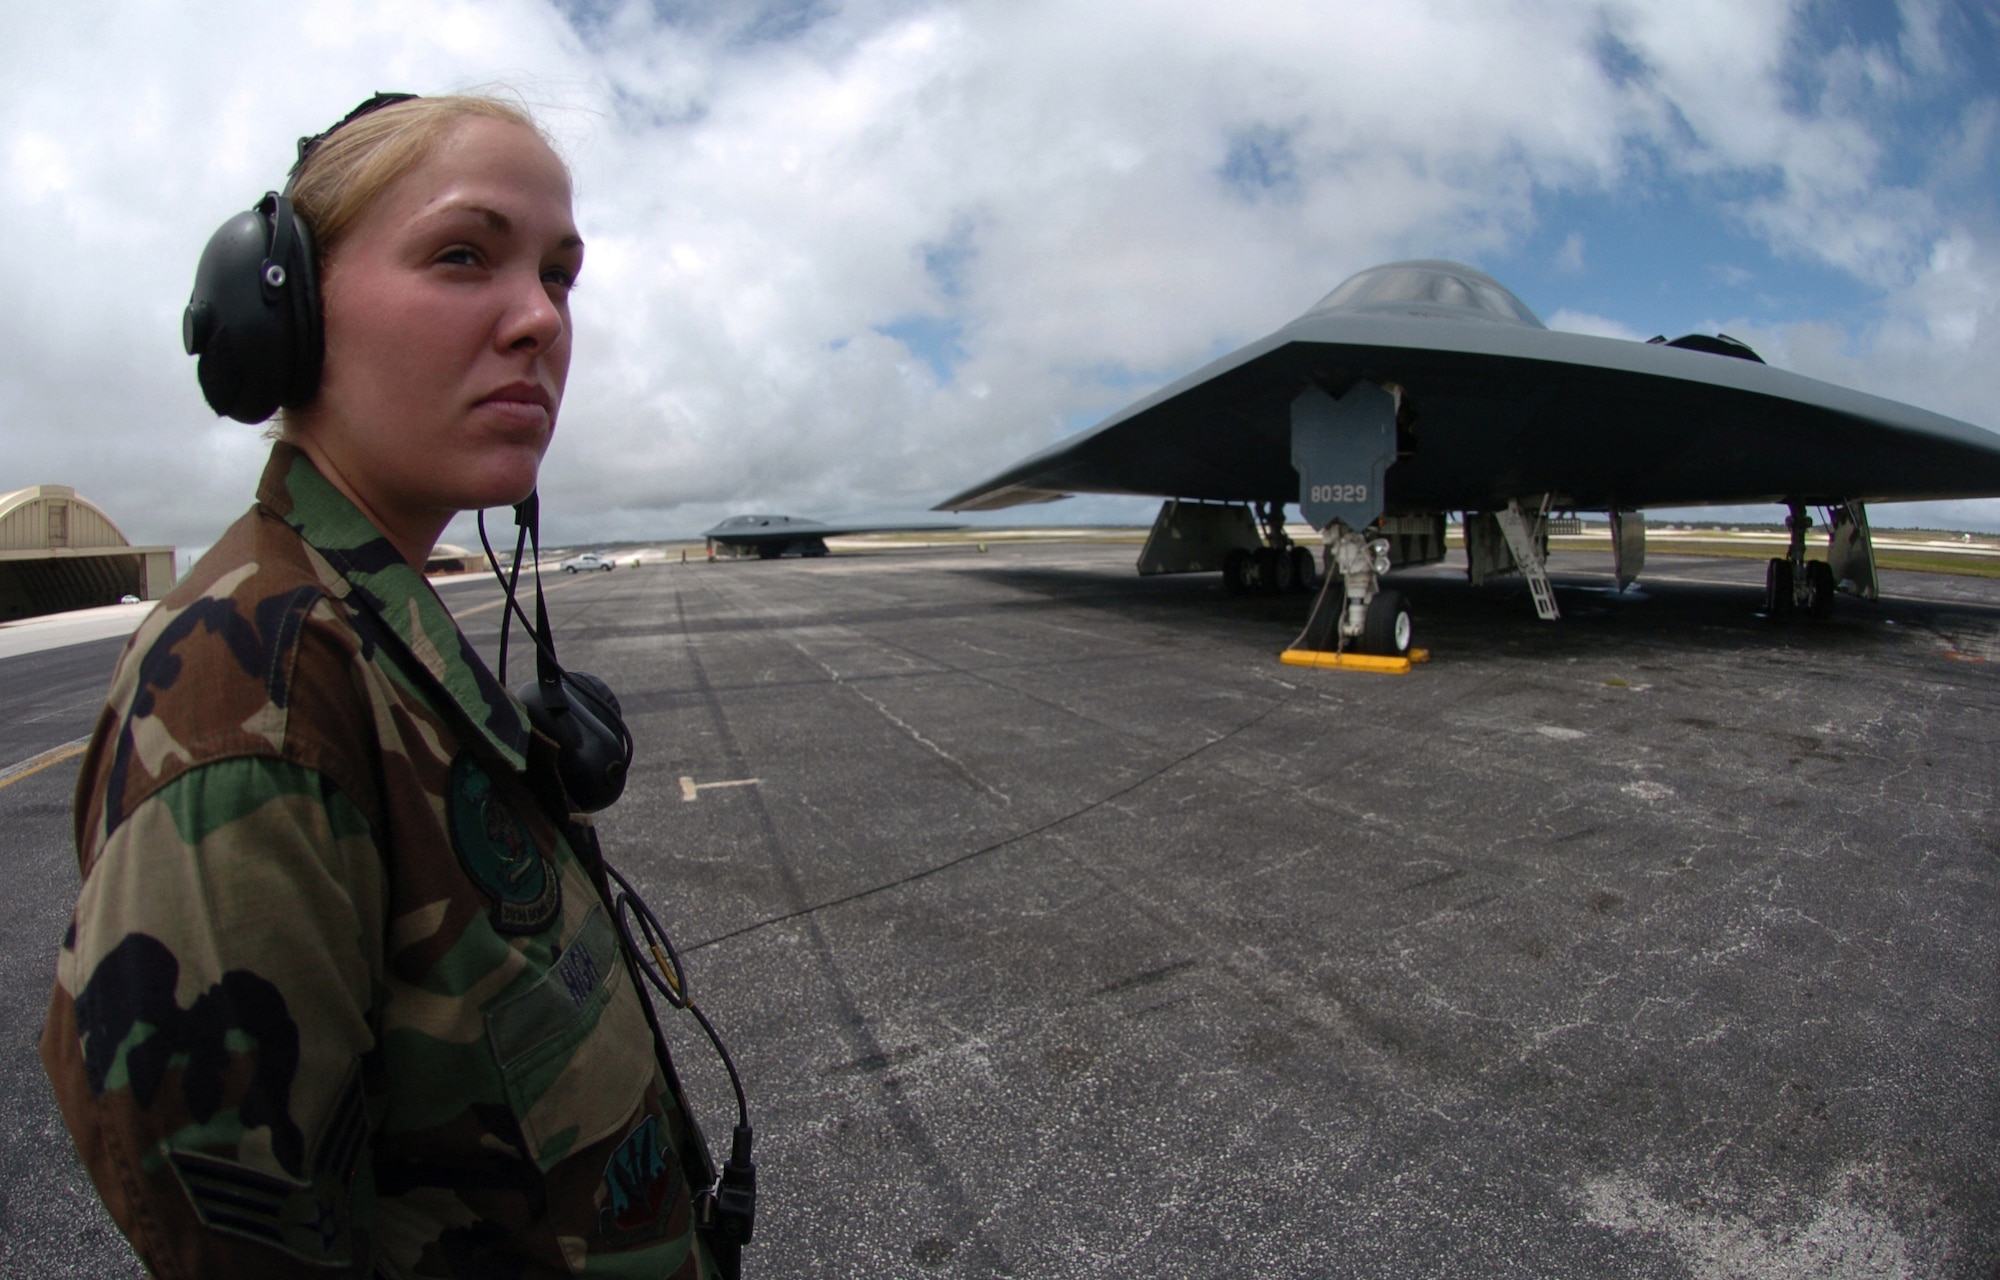 ANDERSEN AIR FORCE BASE, Guam -- Senior Airman Mindy High prepares to launch a B-2 Spirit bomber during a mission here.  The B-2s deployed here Feb. 25 to provide U.S. Pacific Command officials a continuous bomber presence in the Asia-Pacific region, enhancing regional security and the U.S. commitment to the Western Pacific.  Bomber aircraft have had an ongoing presence on the island since February 2004.  Airman High is a crew chief from the 509th Bomb Wing at Whiteman Air Force Base, Mo.  (U.S. Air Force photo by Master Sgt. Val Gempis)